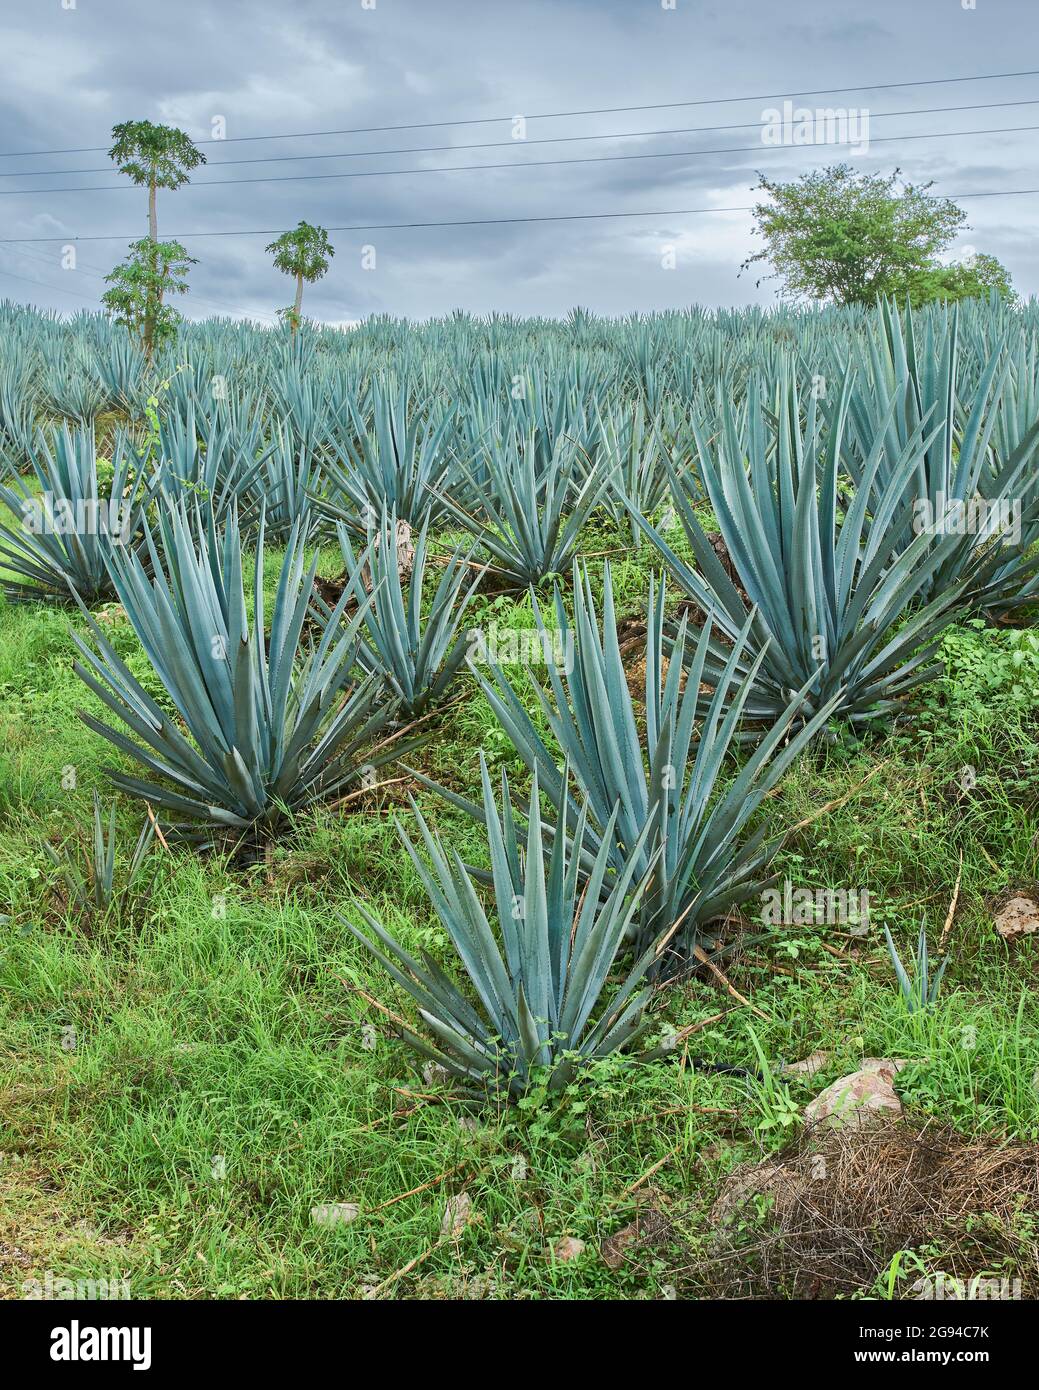 Plantation of blue agave in the field to make tequila Stock Photo